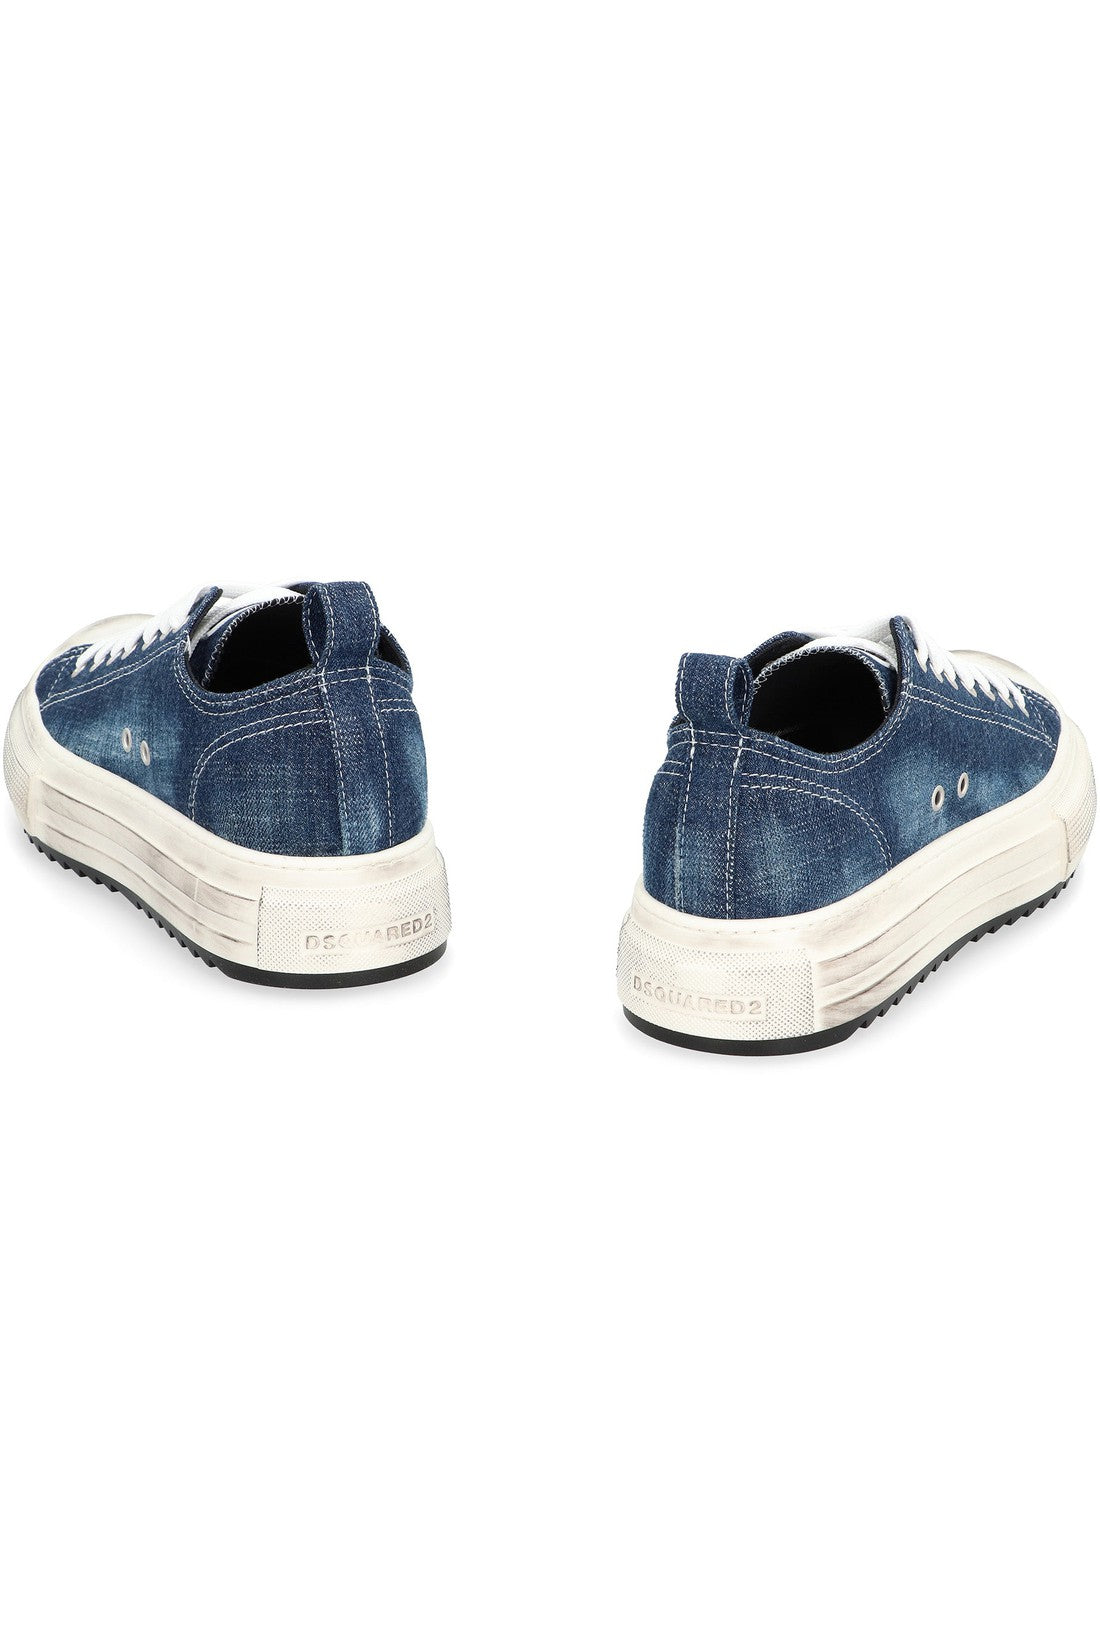 Dsquared2-OUTLET-SALE-Berlin fabric low-top sneakers-ARCHIVIST